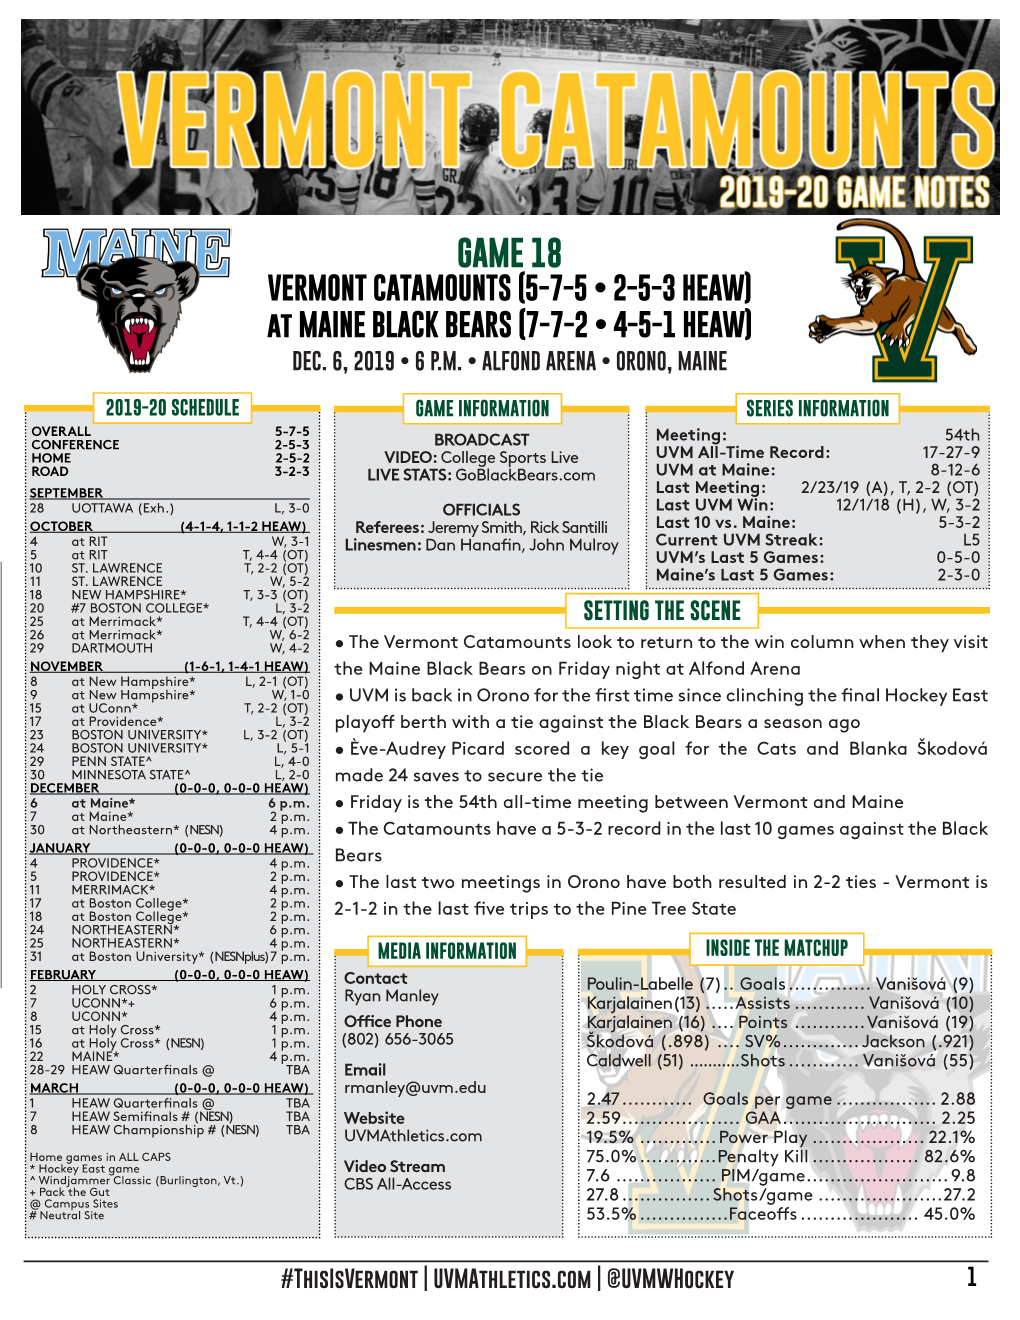 GAME 18 VERMONT CATAMOUNTS (5-7-5 • 2-5-3 HEAW) at MAINE BLACK BEARS (7-7-2 • 4-5-1 HEAW) DEC